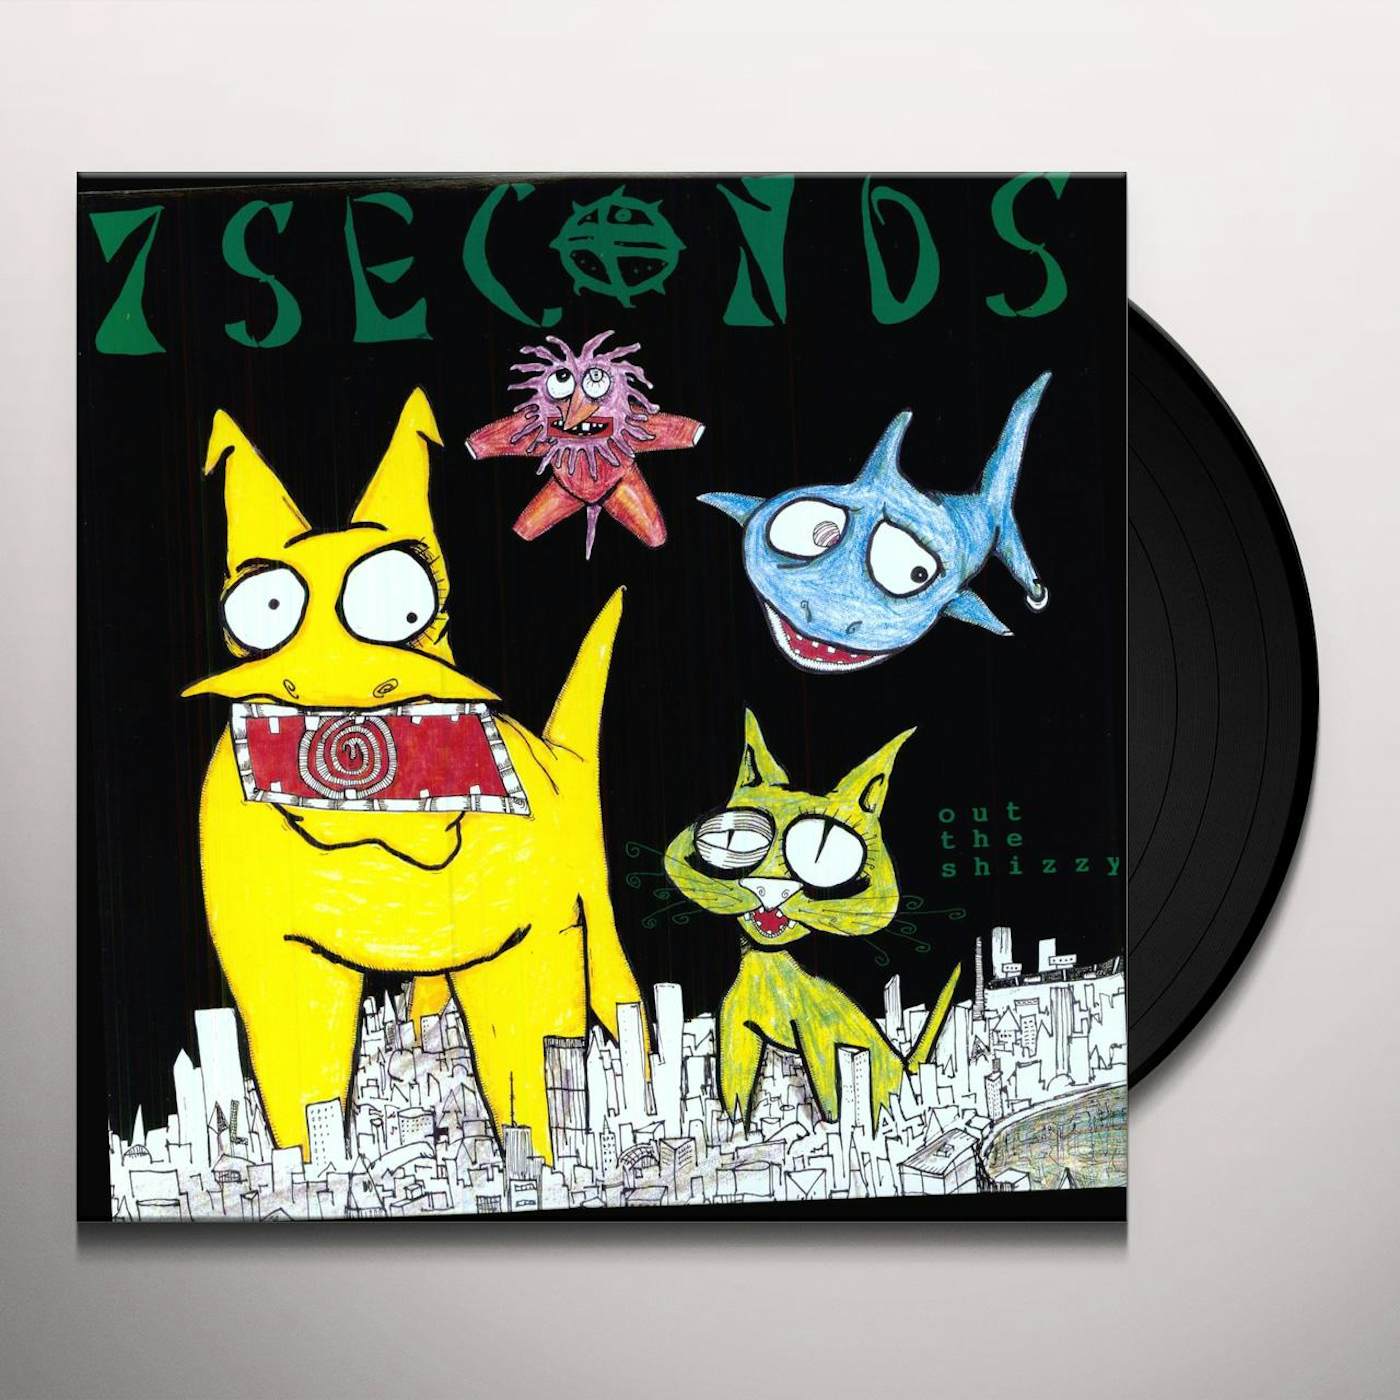 7 Seconds OUT THE SHIZZY Vinyl Record